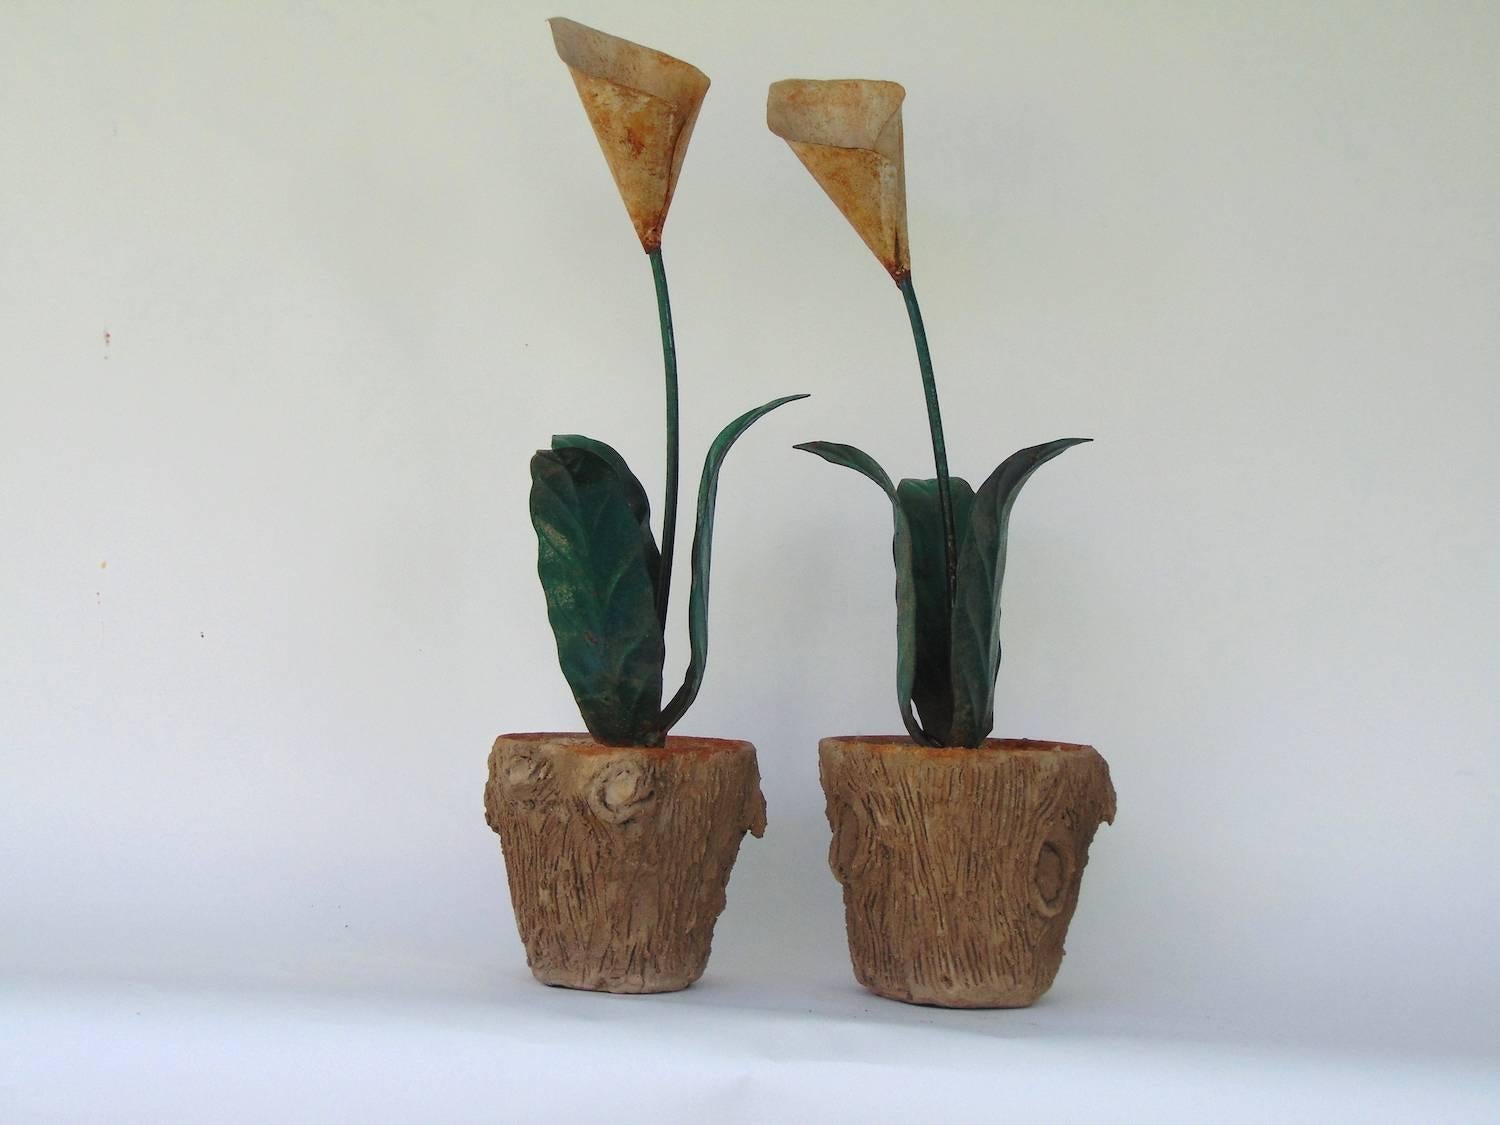 Stunning very similar pair of decorative tole peinte calla lilies in concrete faux bois jardinières,
one slightly taller than the other. Very realistic treatment of wood on the pots. The smaller of the two is 29.5